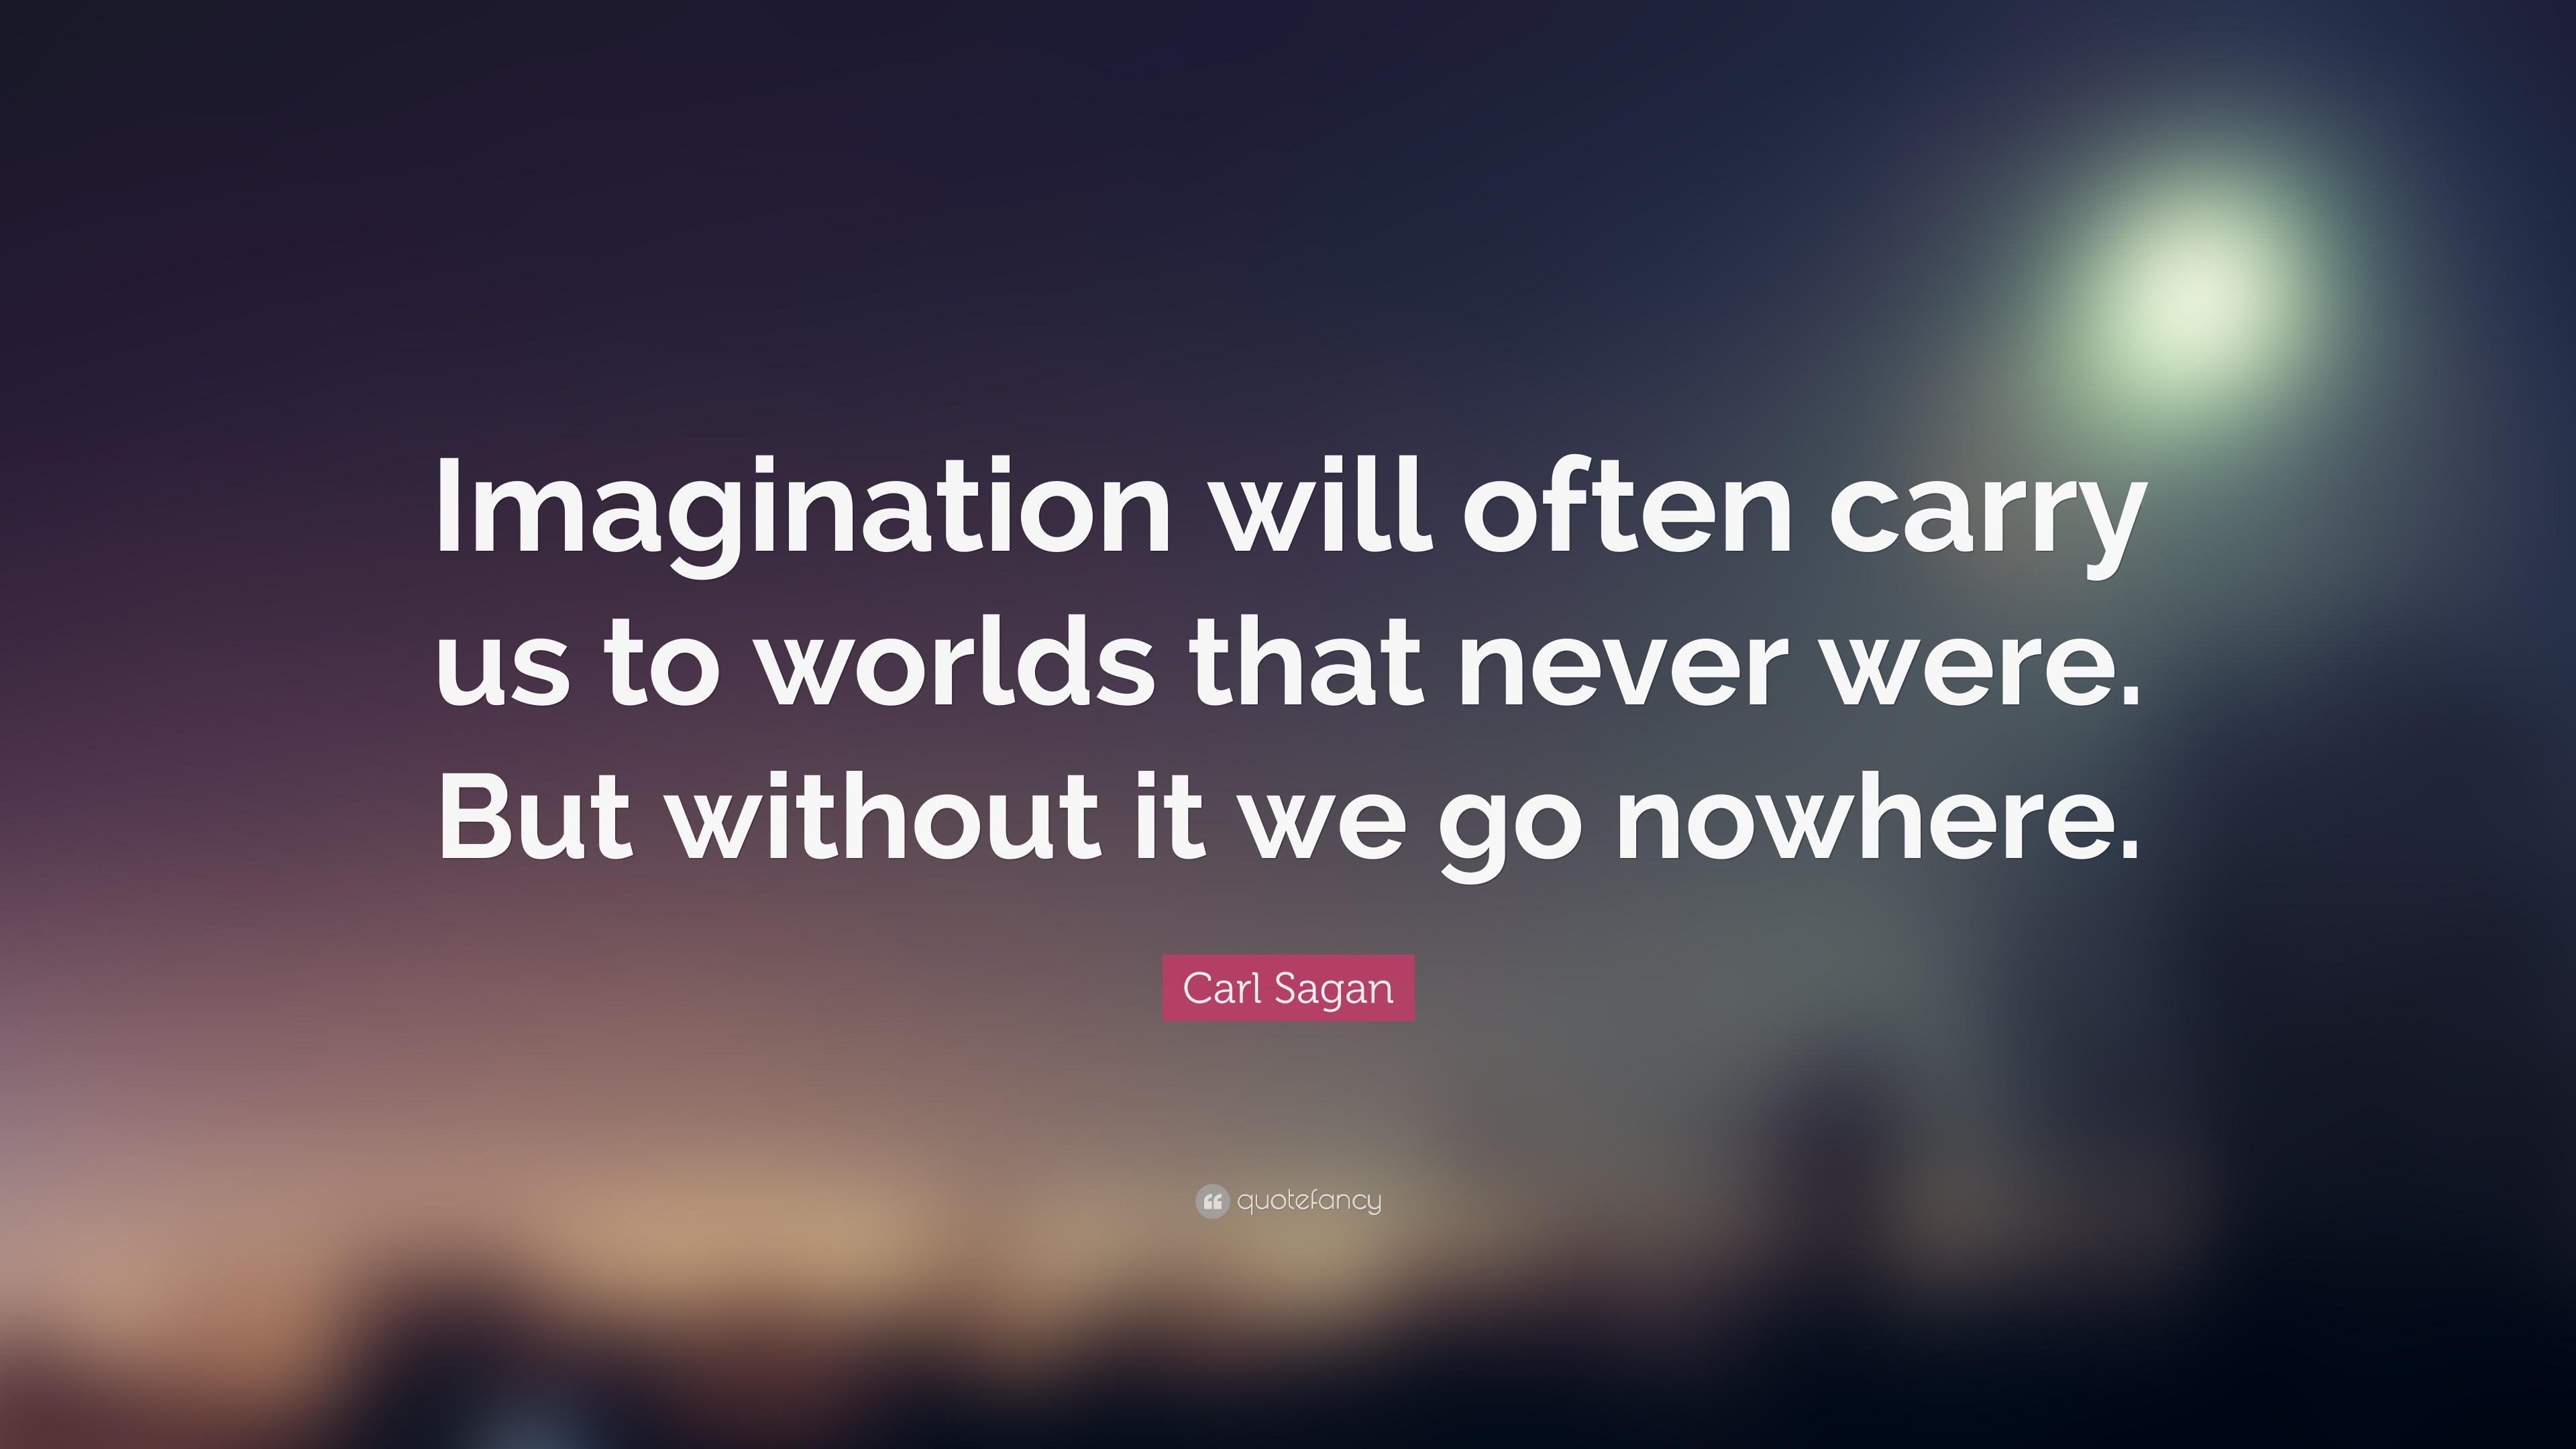 Carl Sagan Quote: “Imagination will often carry us to worlds that never ...